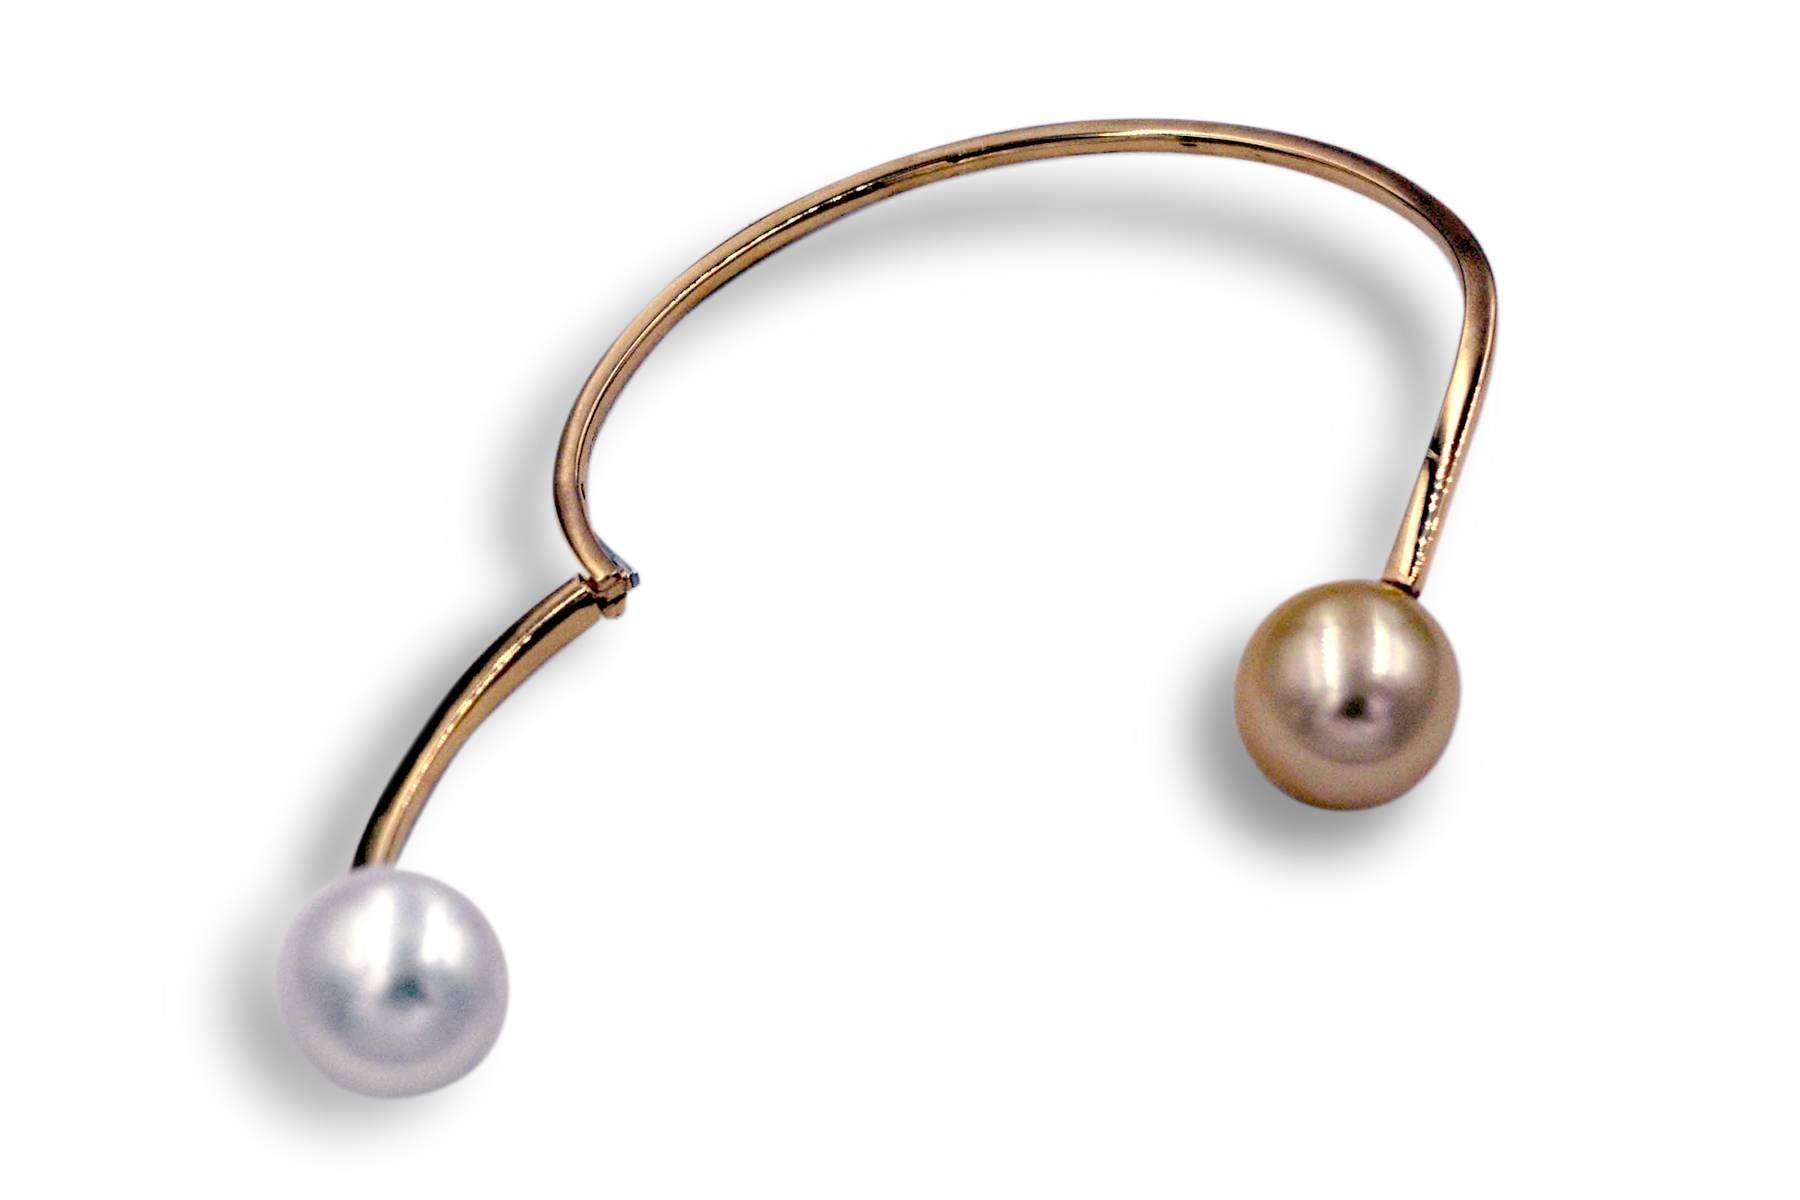 18K Yellow gold bangle featuring one white South Sea & one golden South Sea Pearl measuring 13-14 mm. Pearls can be changed to Tahitian, Pink upon request. Price subjected to change. 

Attached are prices of different styles. 
